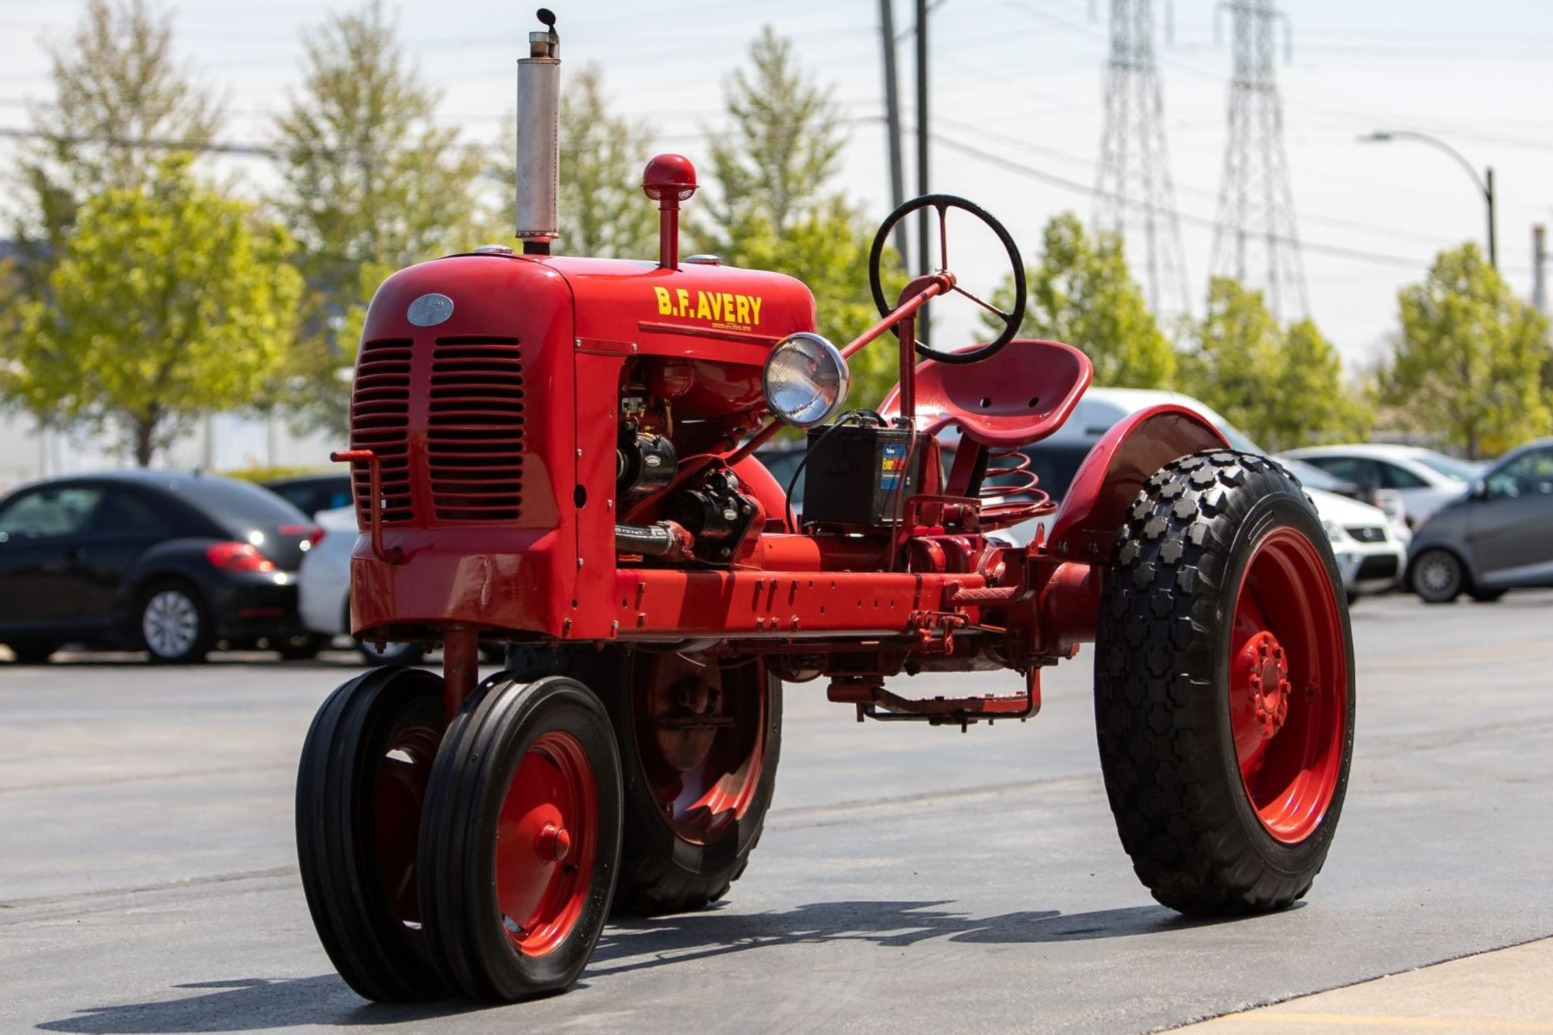 Used 1949 B.F. Avery Model A Tractor Review